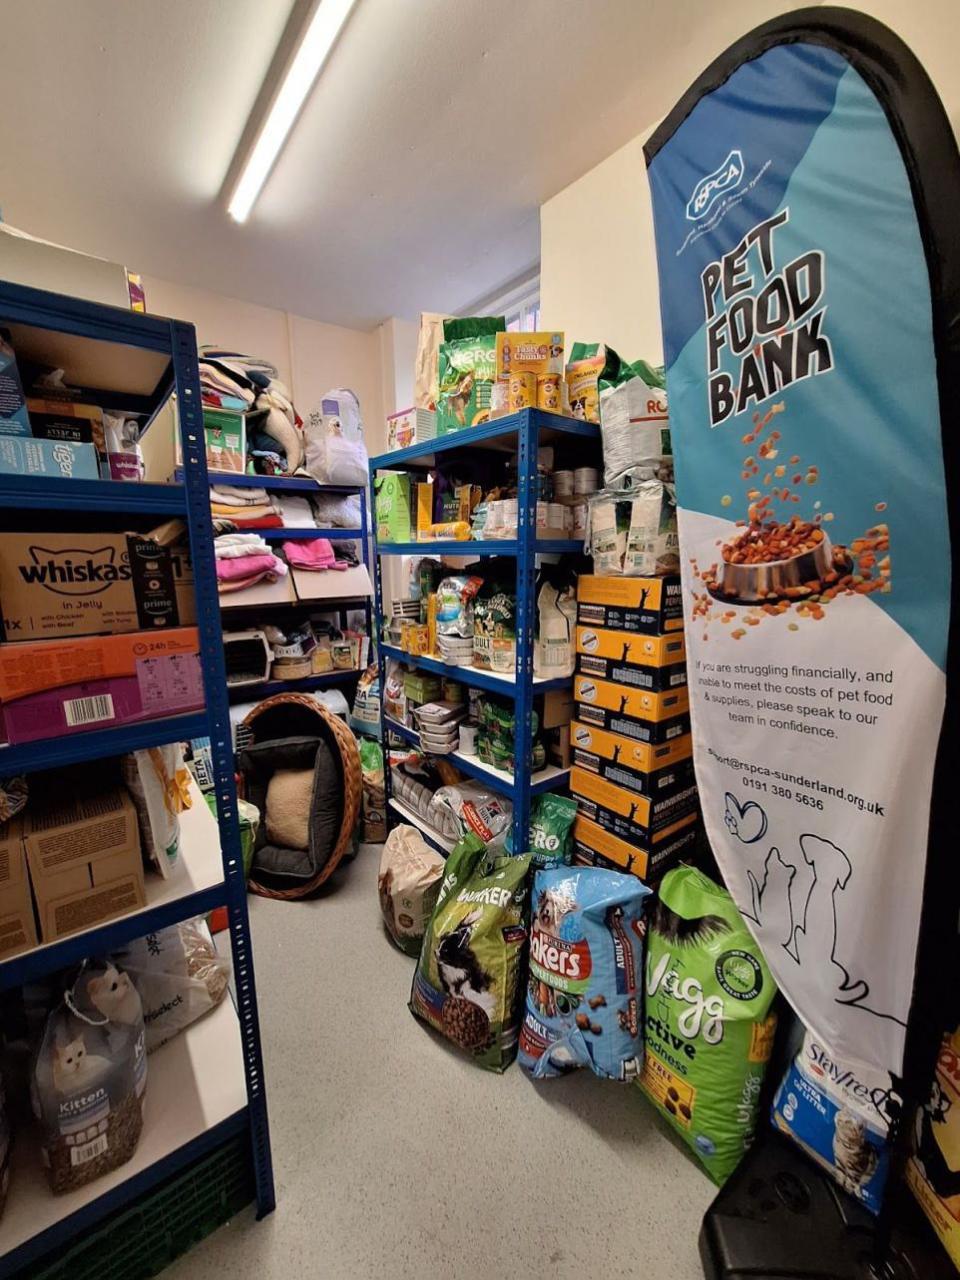 The Northern Echo: The Pet Food Bank in Chester-le-Street